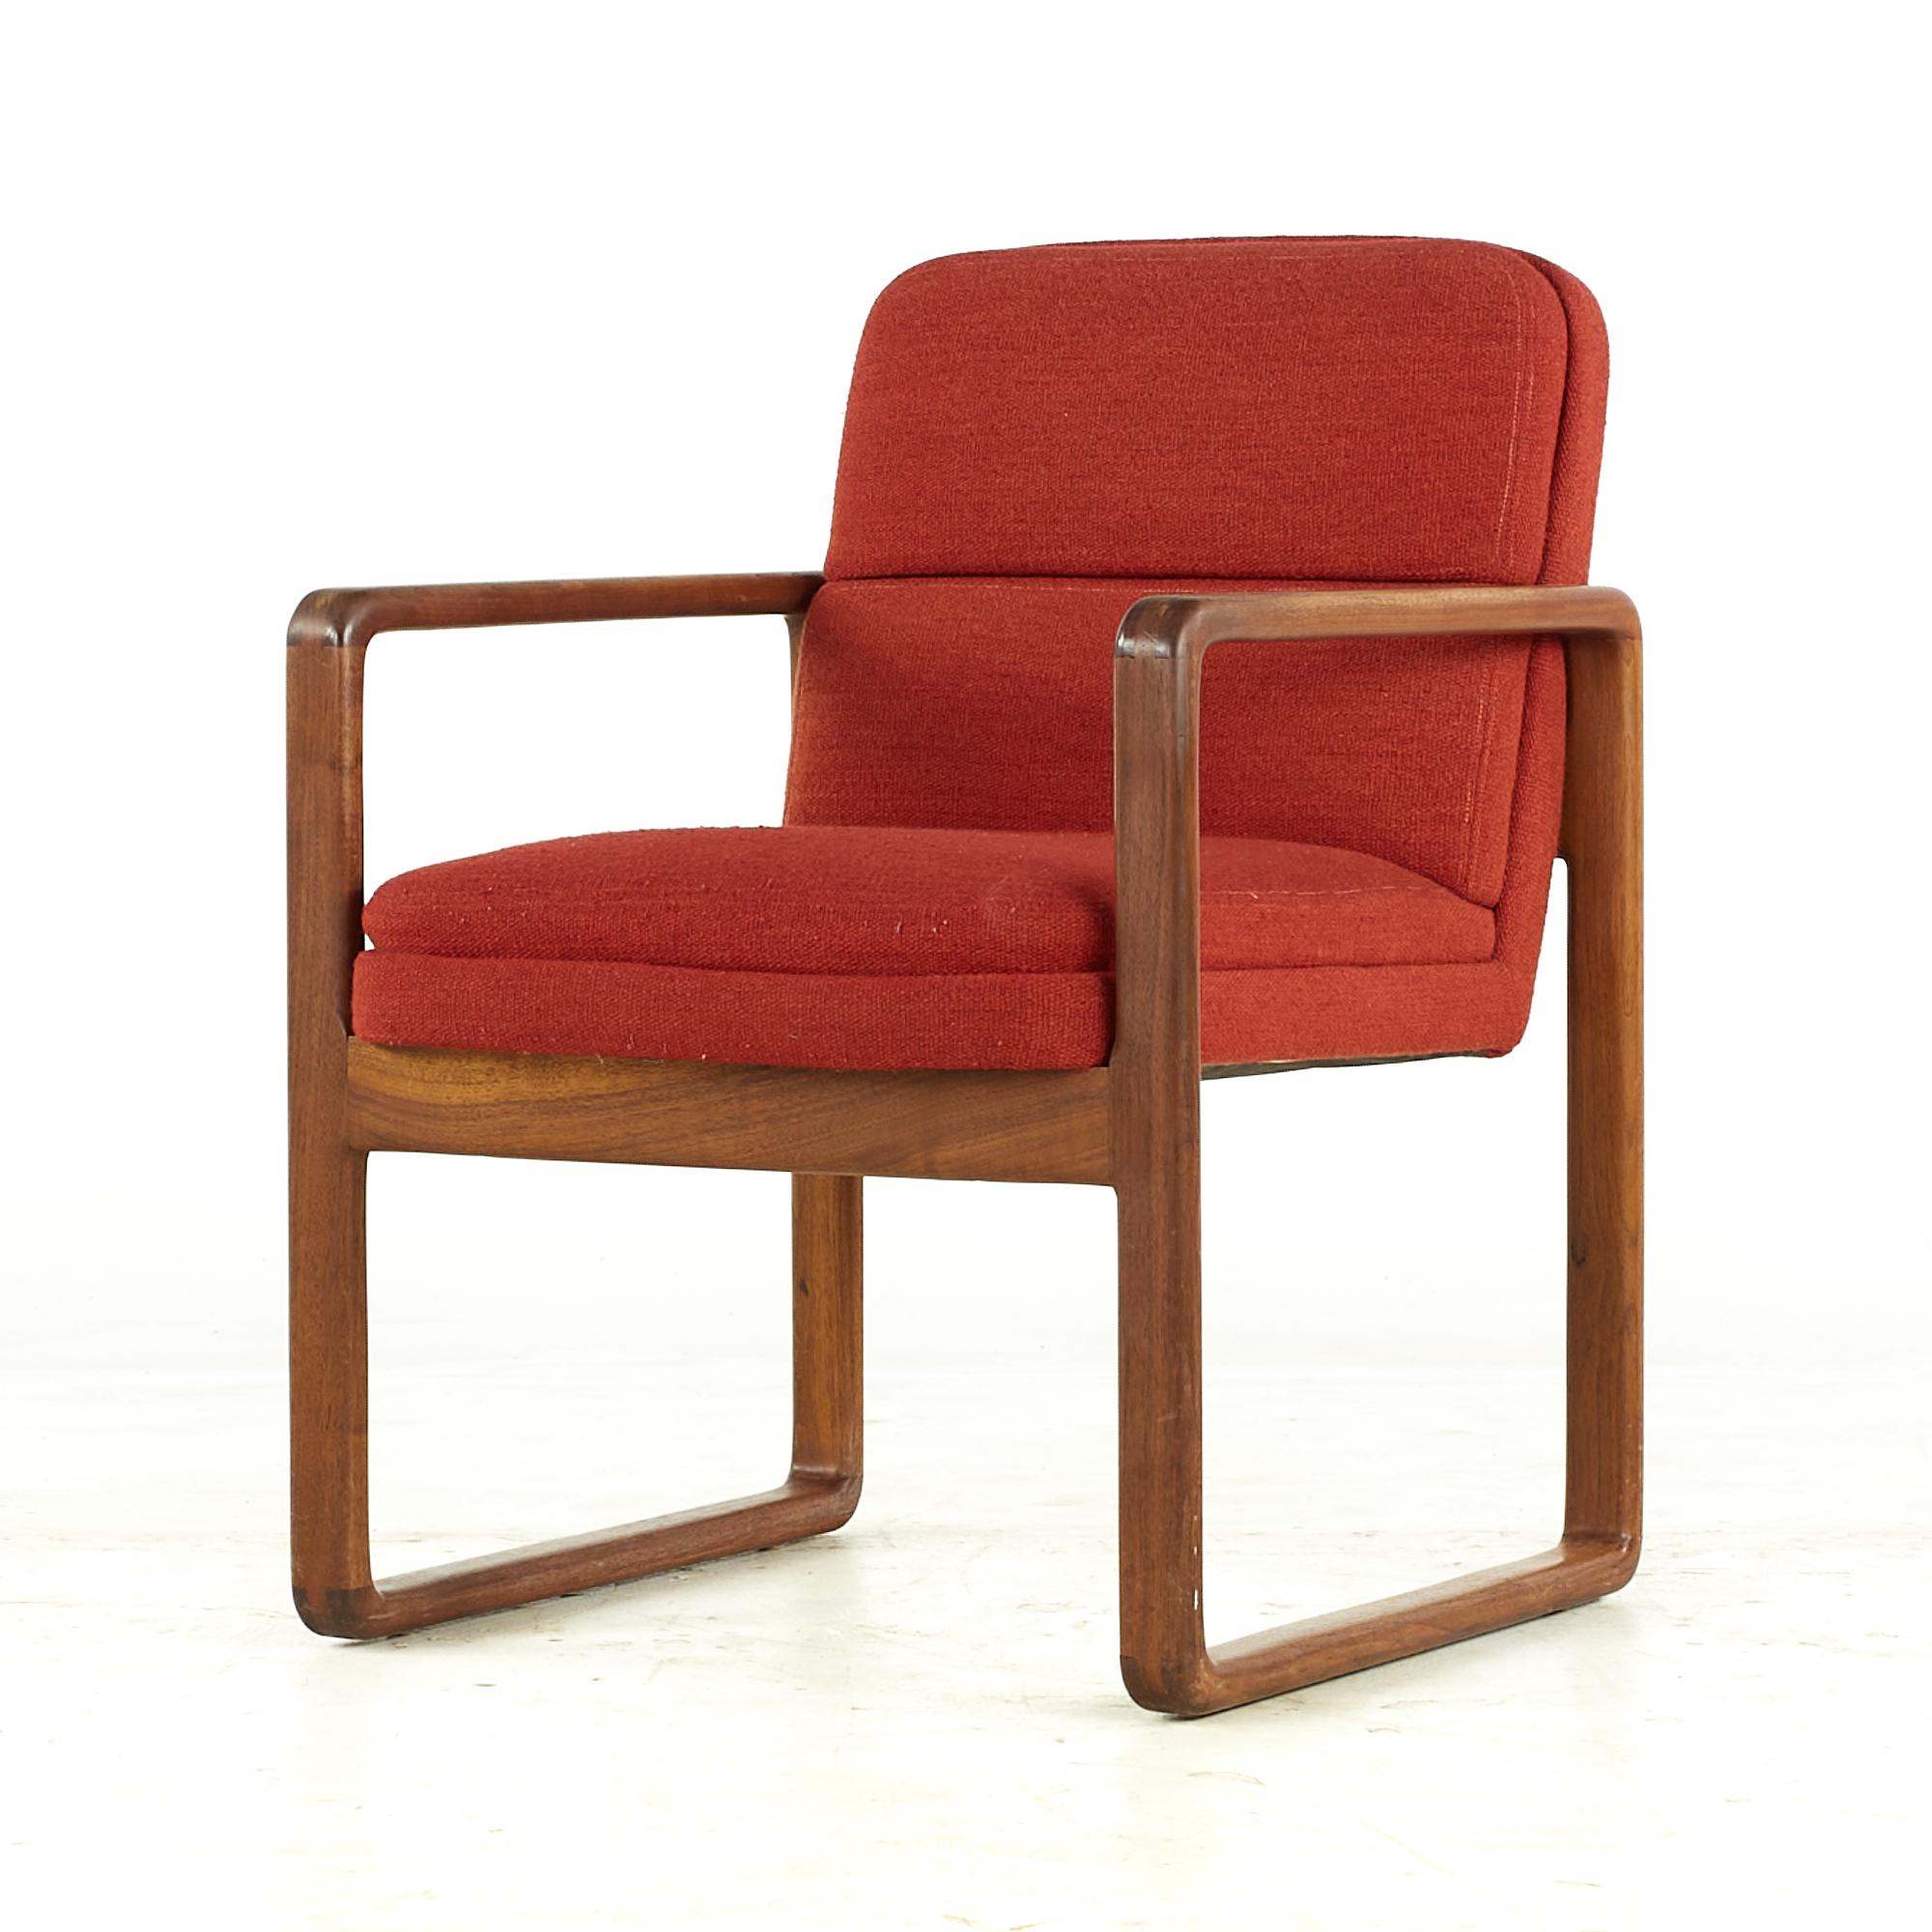 Late 20th Century Milo Baughman Style Midcentury Oak Dining Chairs, Set of 6 For Sale